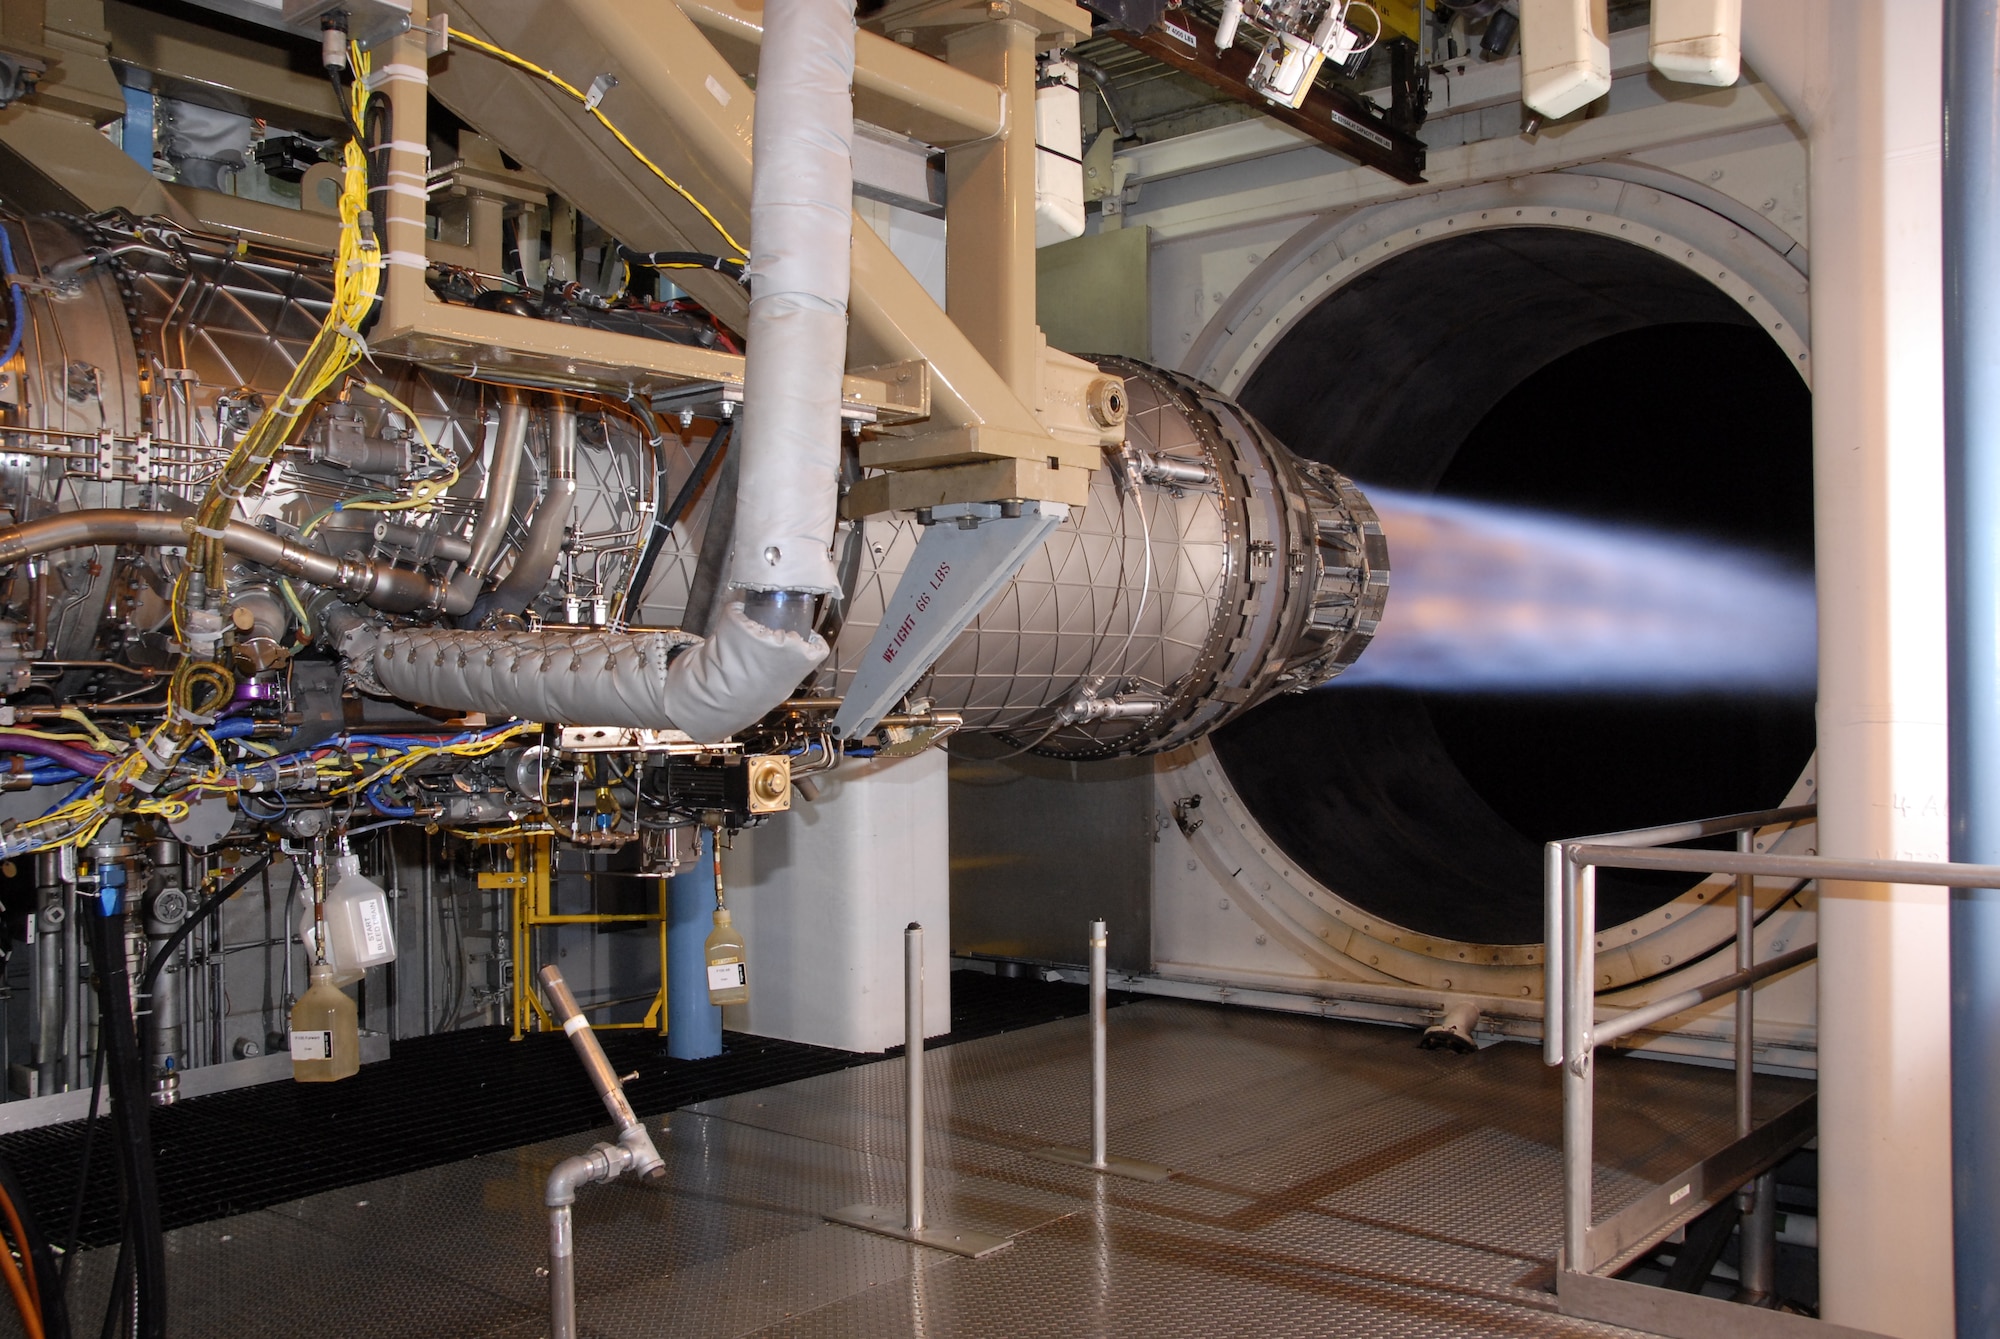 An F100-PW-229 Engine Enhancement Package engine undergoes ram testing in SL-3 as part of a year-long Accelerated Mission Test, the longest test of its kind at Arnold. Ram is a term describing test conditions in which inlet pressures are above ambient or atmospheric conditions. (Photo by Rick Goodfriend)